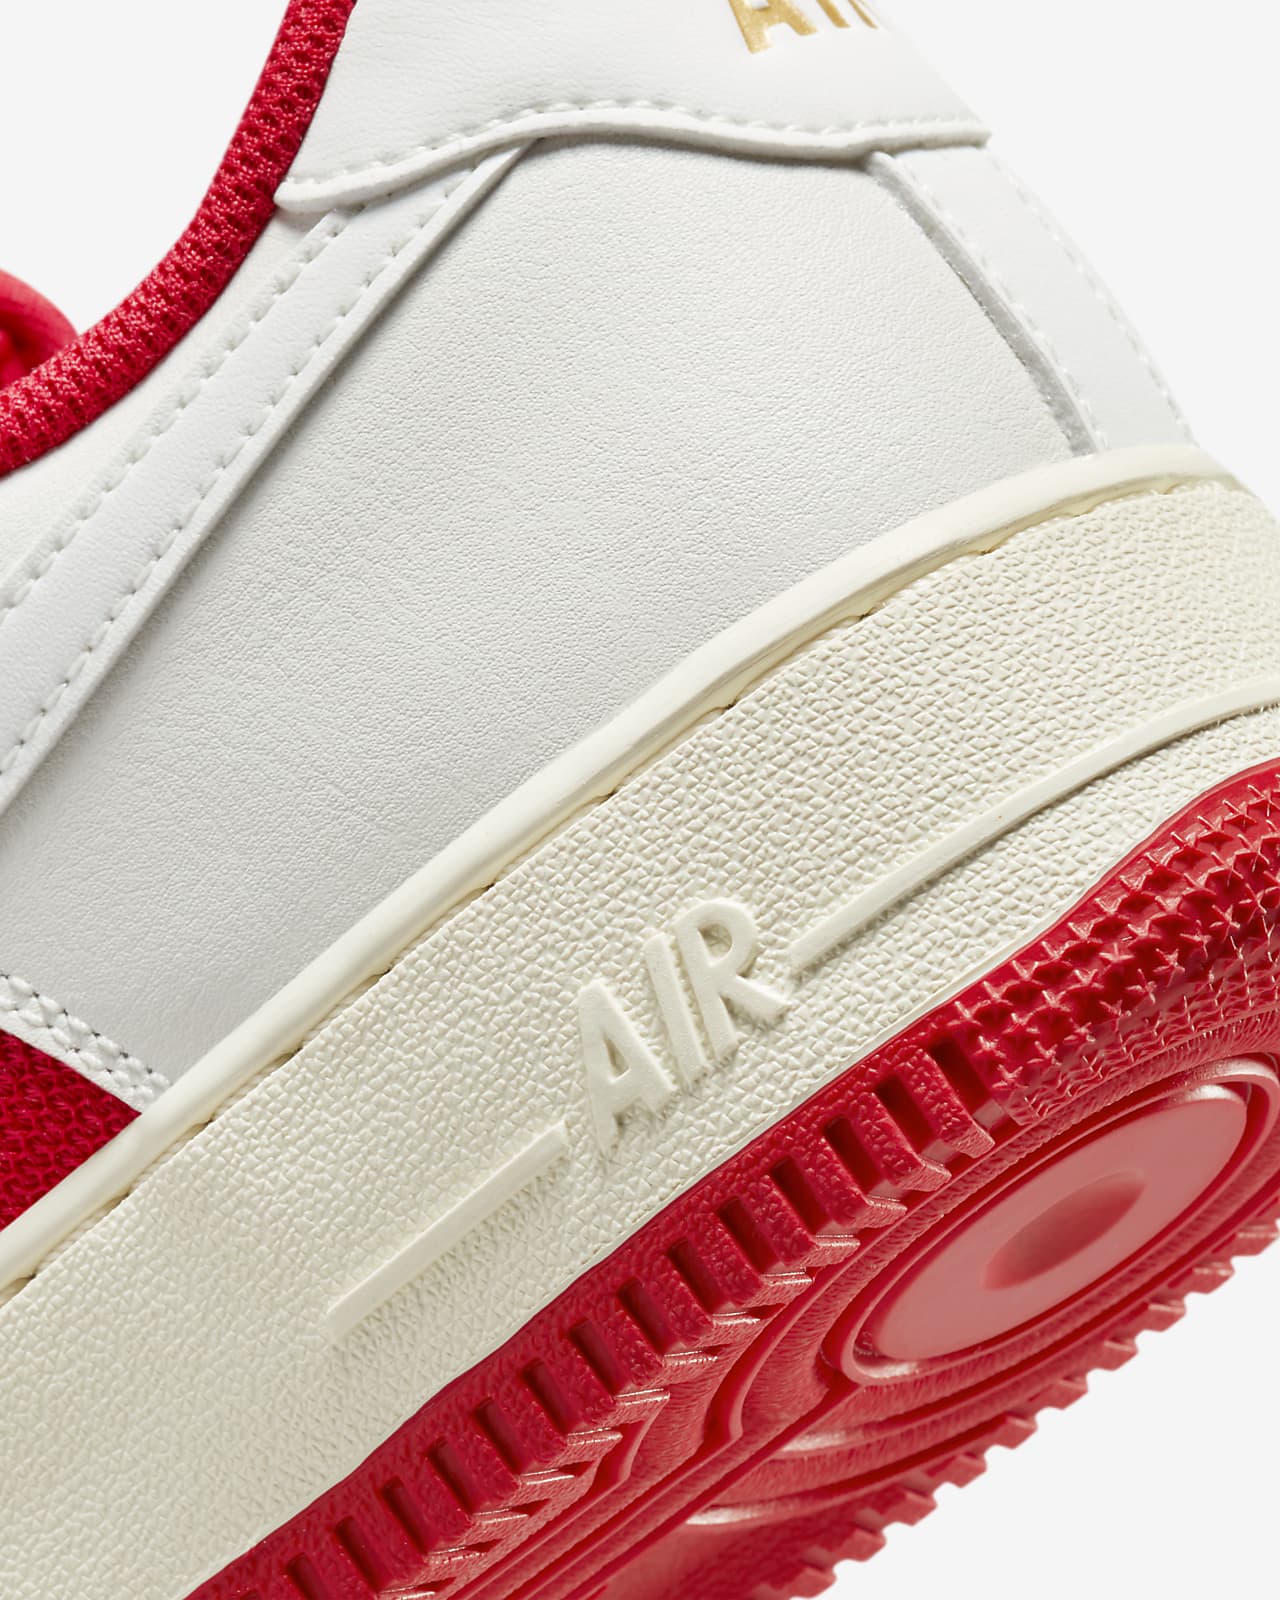 Nike Air Force 1 '07 Red - Size 7.5 Men